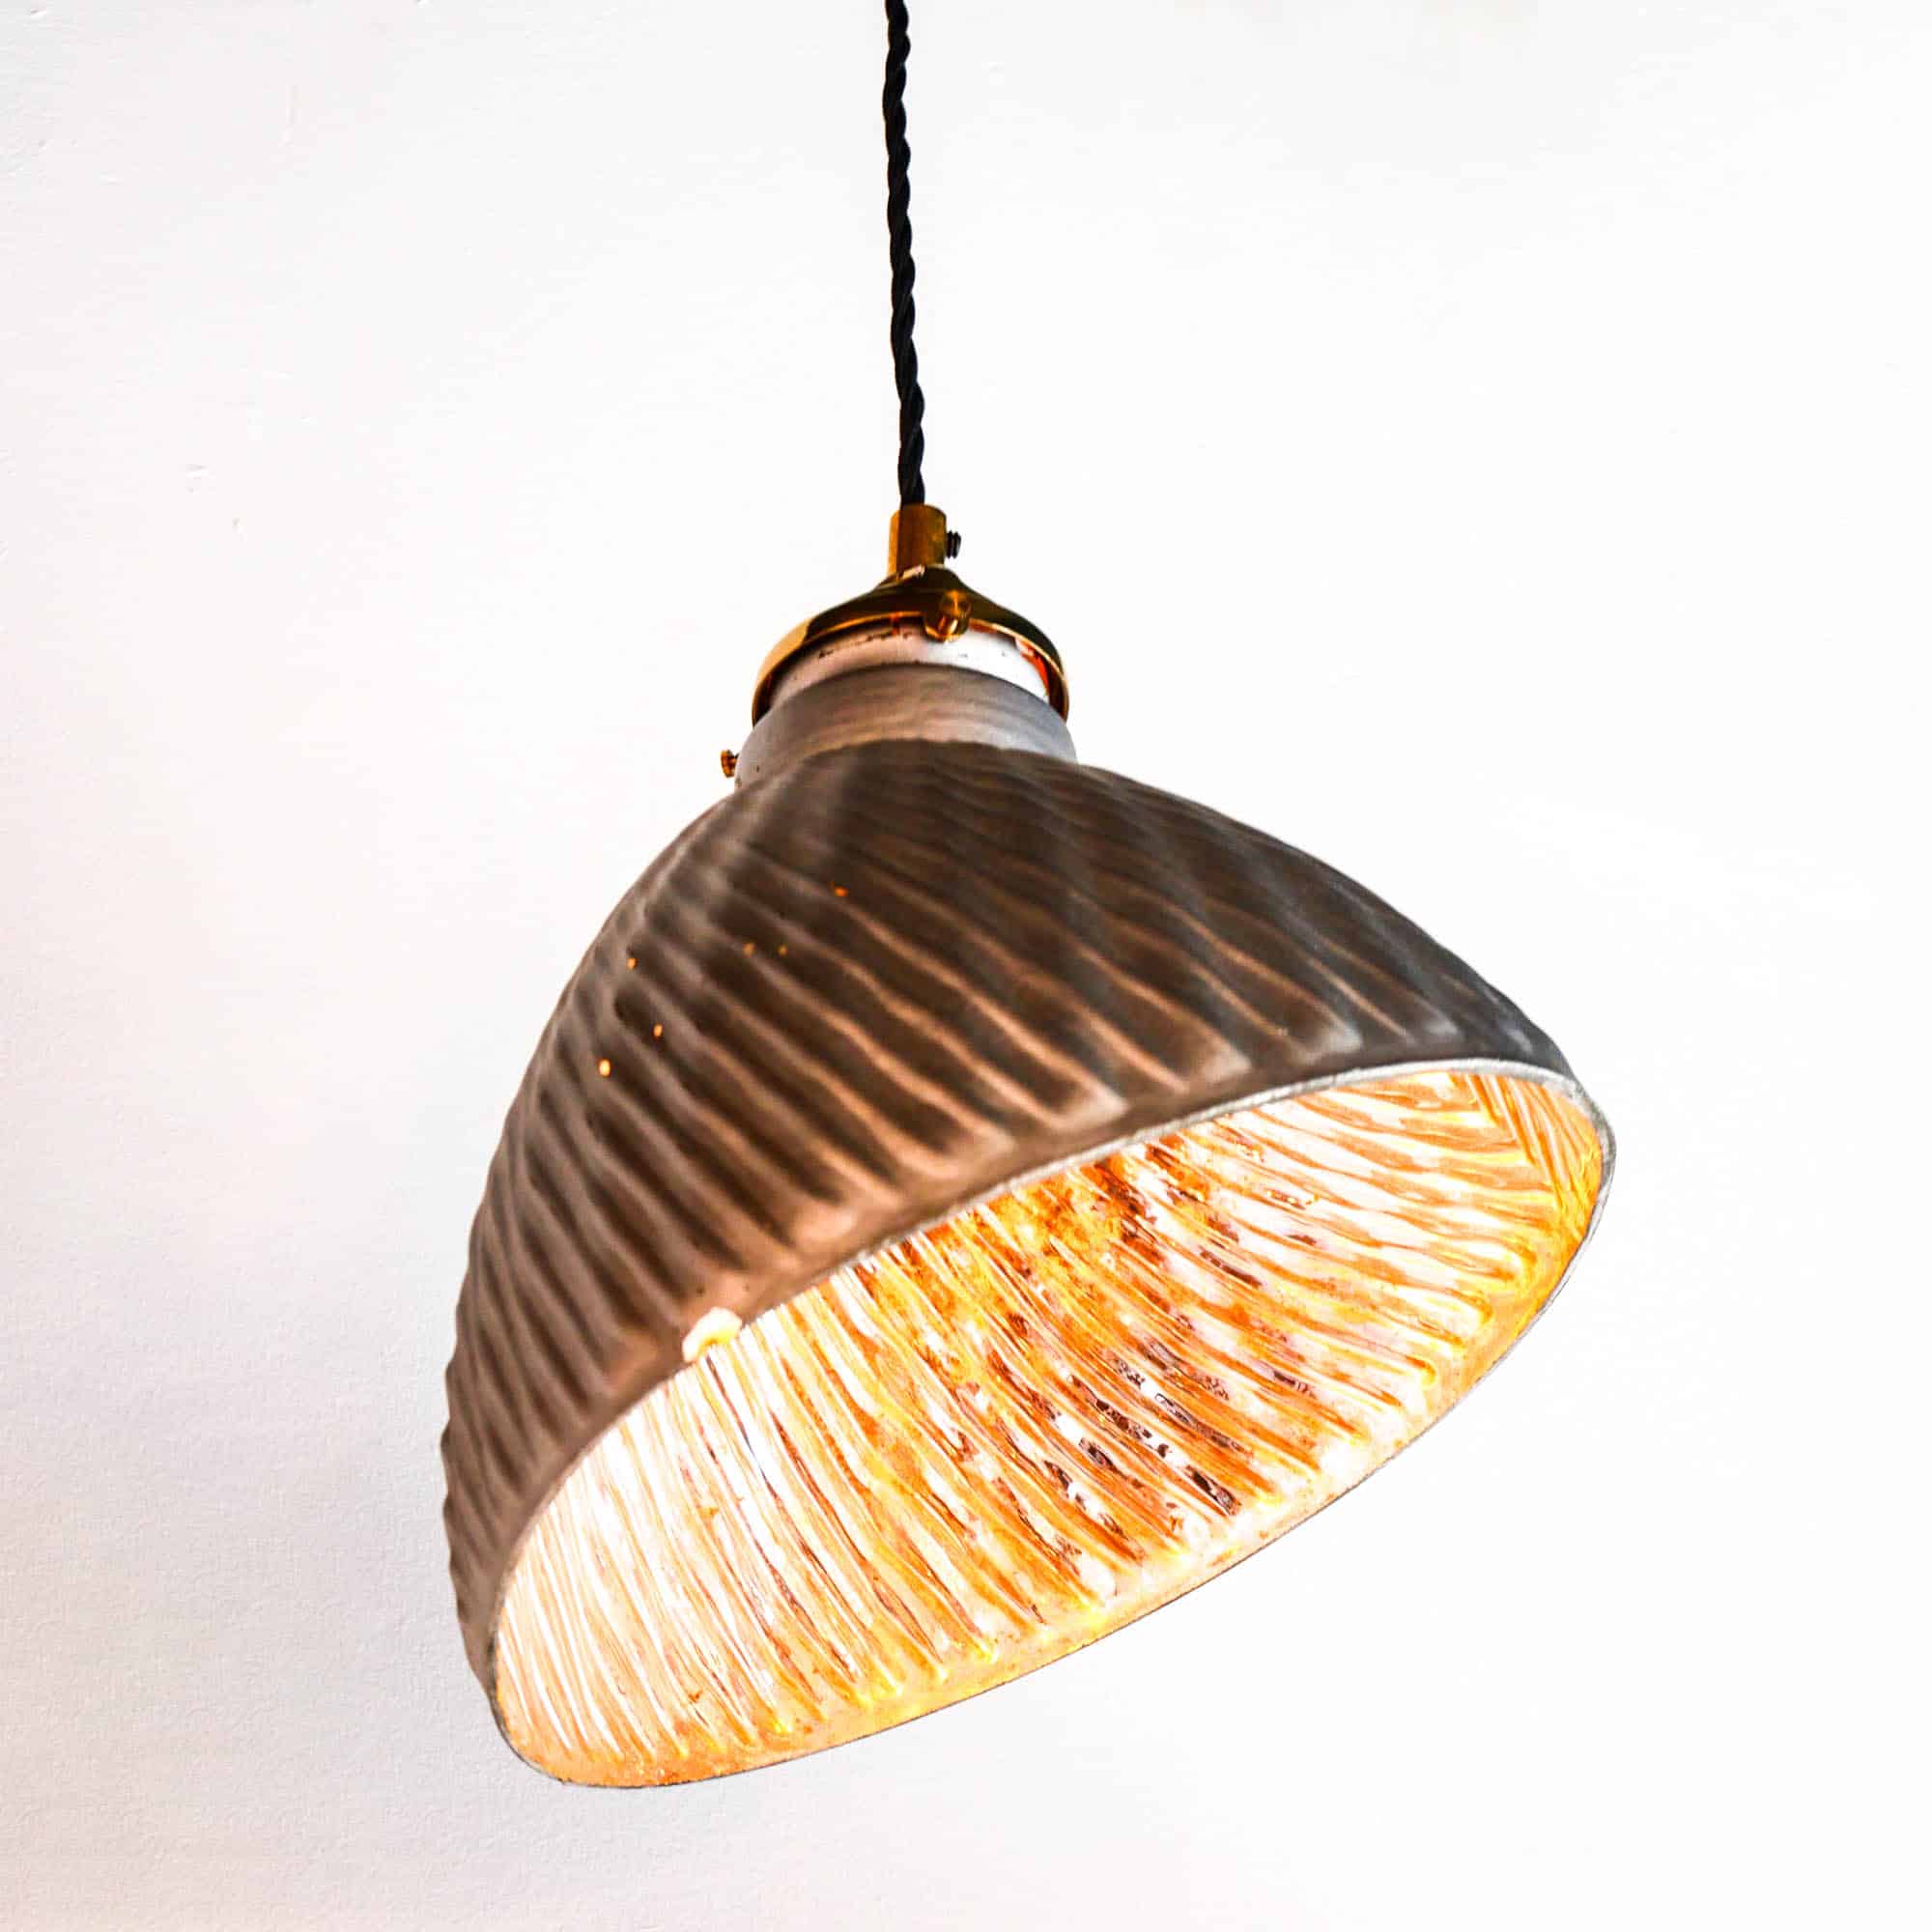 Old eglomized glass lampshade mounted in suspension – V1 - Helioray anciellitude